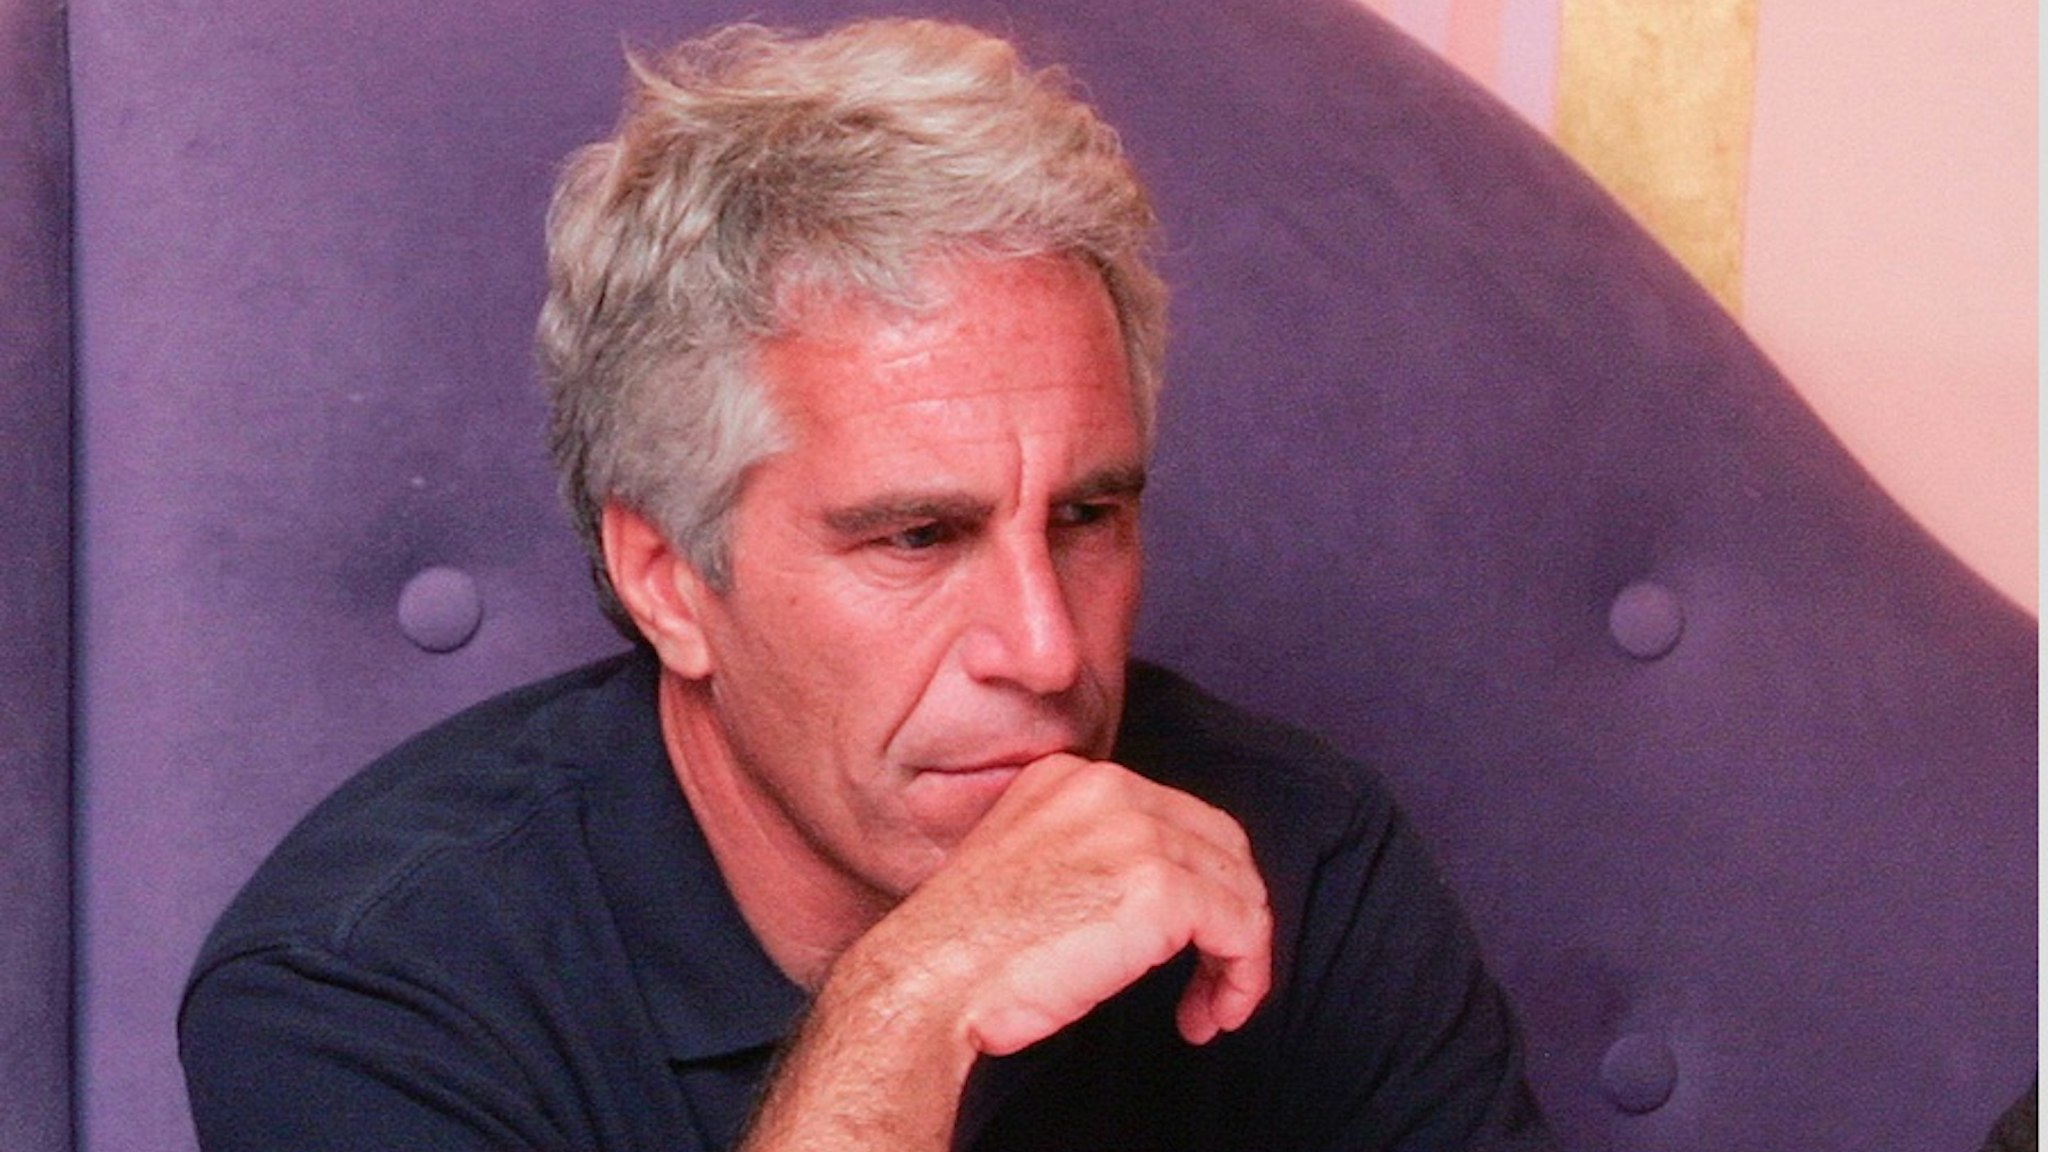 Billionaire Jeffrey Epstein in Cambridge, MA on 9/8/04. Epstein is connected with several prominent people including politicians, actors and academics.